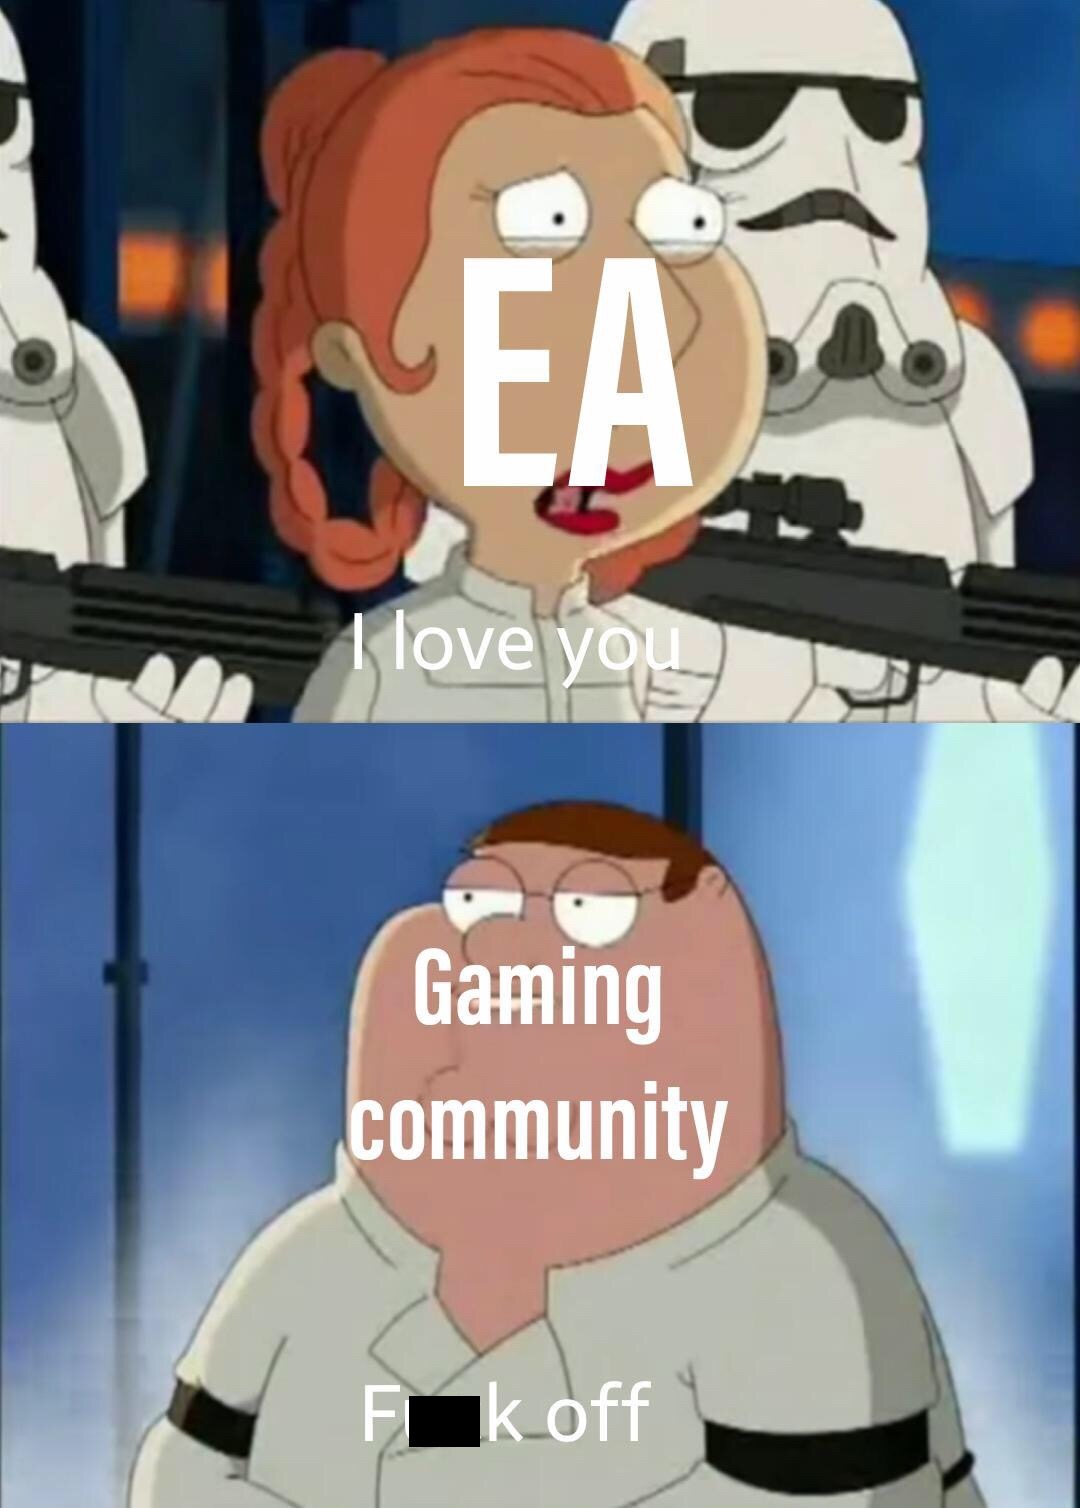 family guy i love you - Ea . I love you une Gaming community koff